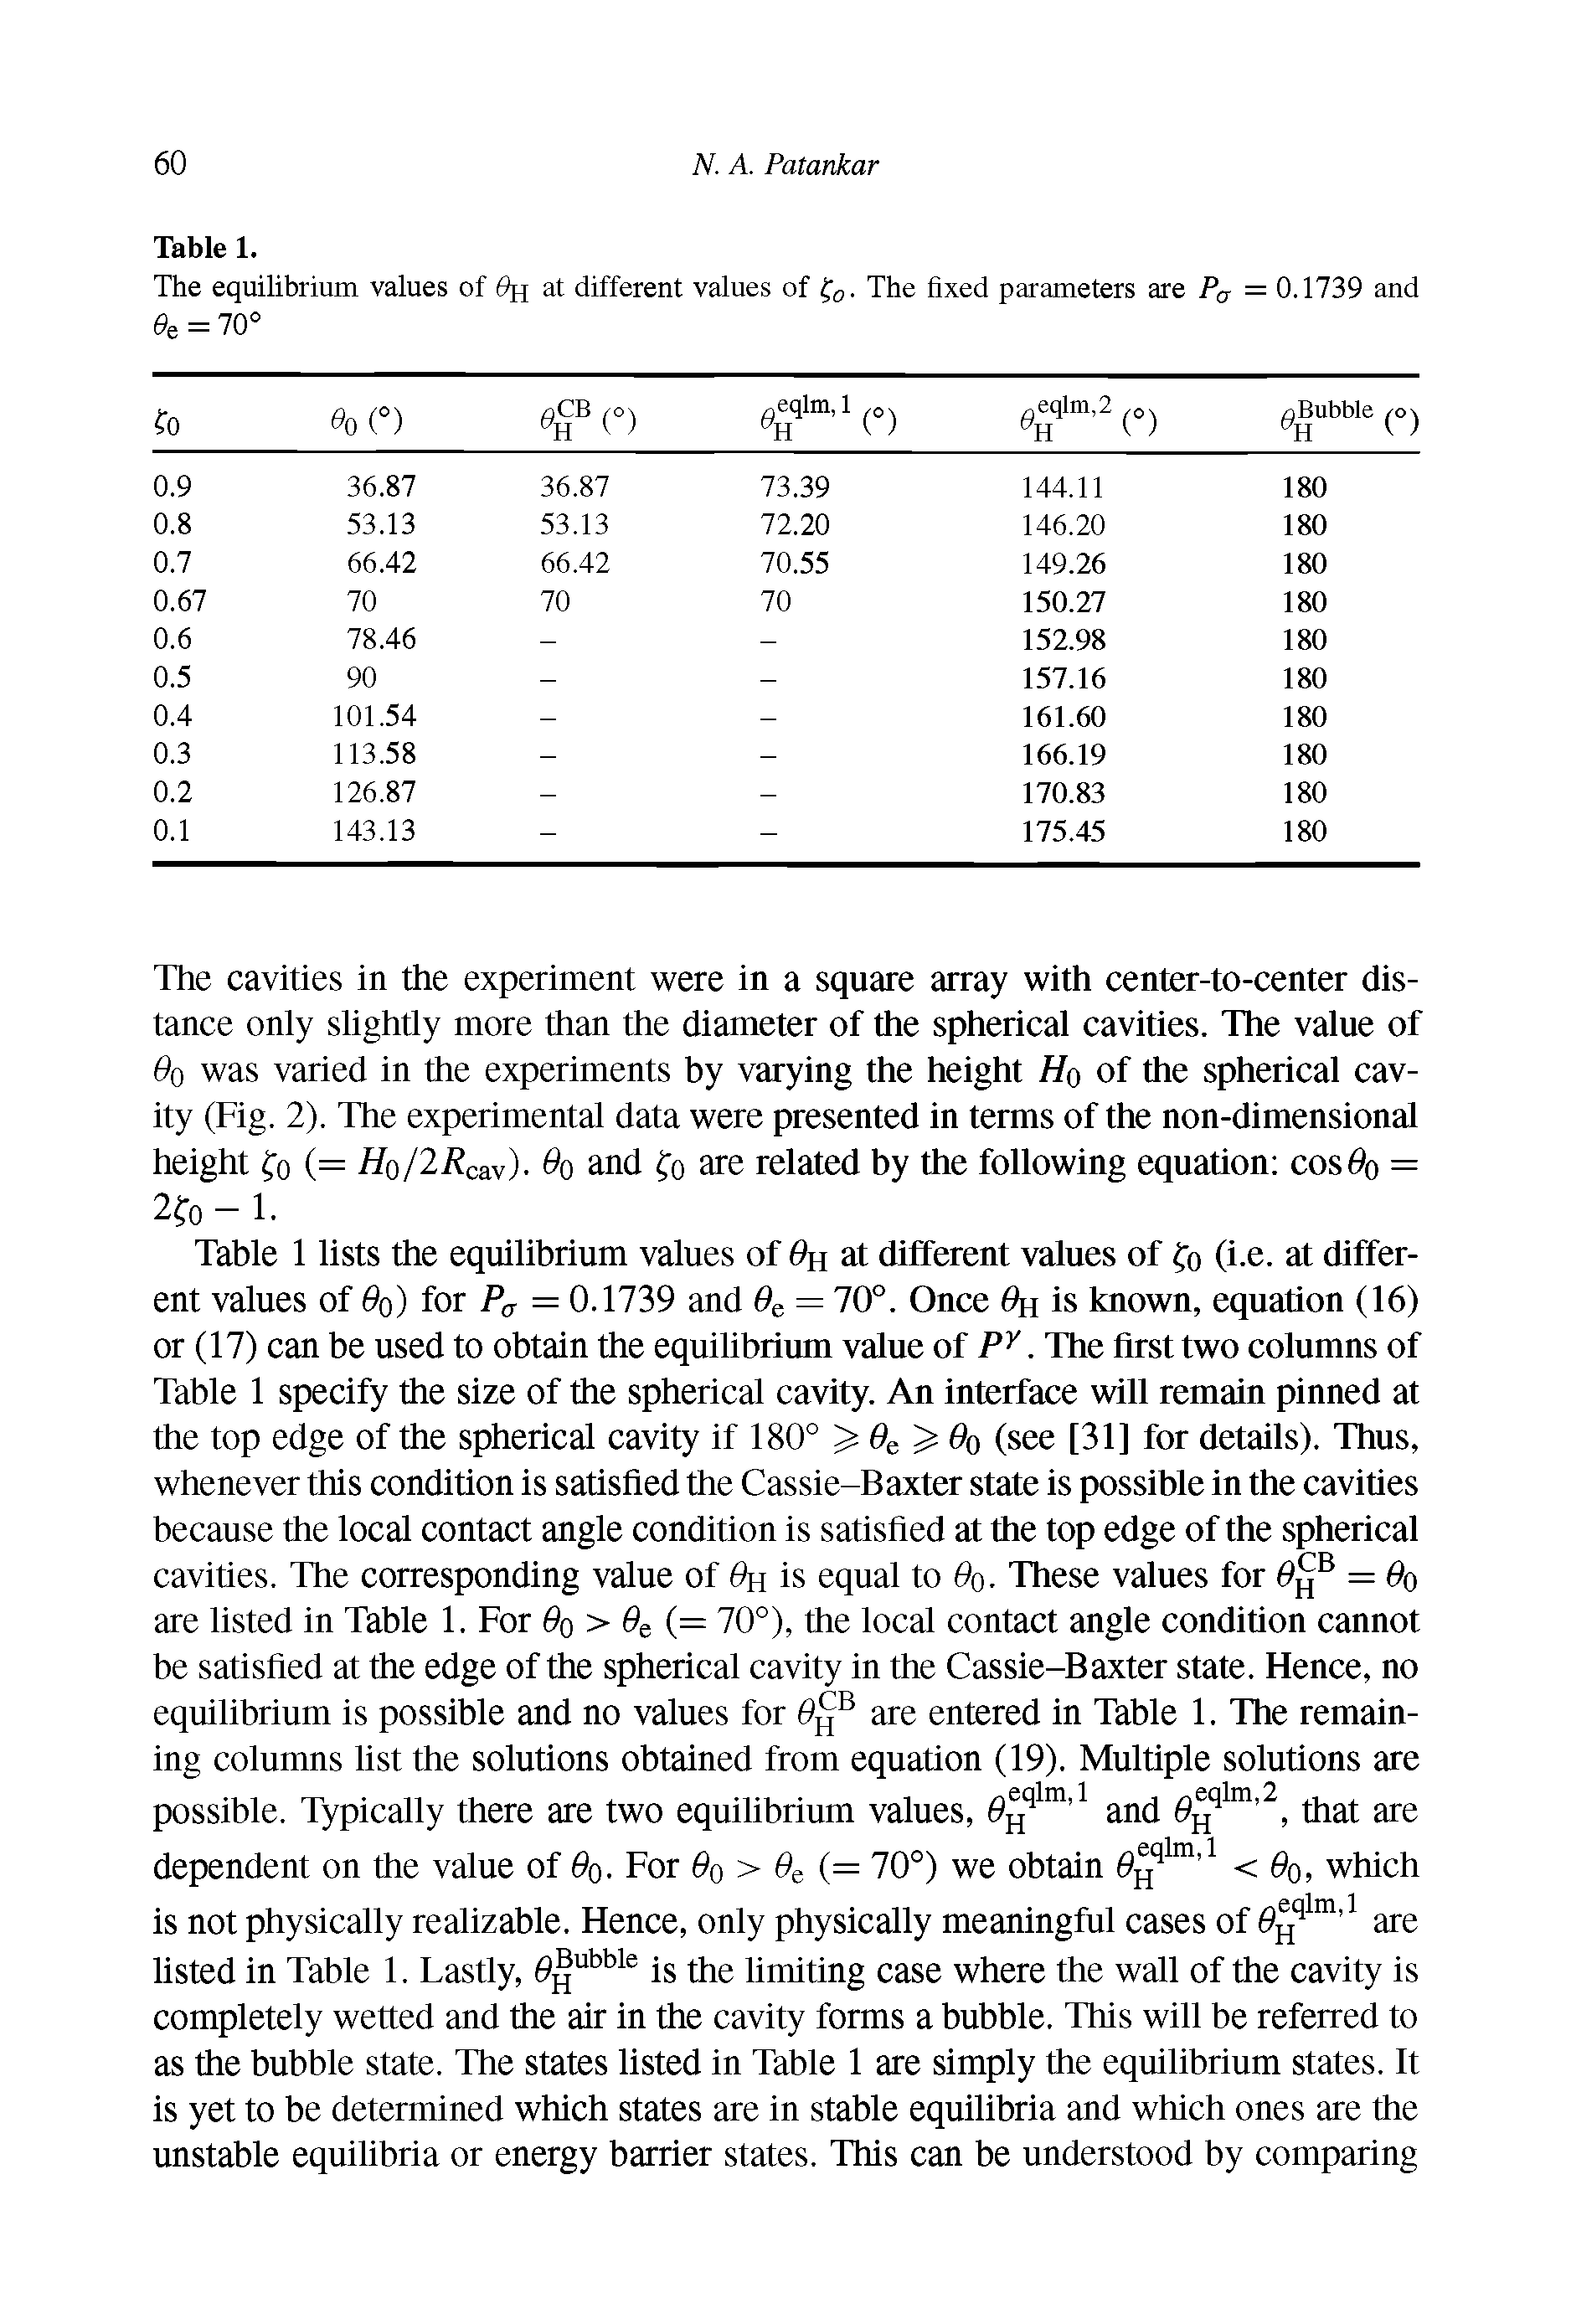 Table 1 lists the equilibrium values of 0h at different values of Co (i e. at different values of 9q) for = 0.1739 and 0e = 70°. Once % is known, equation (16) or (17) can be used to obtain the equilibrium value of. The first two columns of Table 1 specify the size of the spherical cavity. An interface will remain pinned at the top edge of the spherical cavity if 180° 0e 0o (see [31] for details). Thus, whenever this condition is satisfied the Cassie-Baxter state is possible in the cavities because the local contact angle condition is satisfied at the top edge of the spherical cavities. The corresponding value of Ou is equal to Oq. These values for 0 = 0o are listed in Table 1. For 0q > (= 70°), the local contact angle condition cannot...